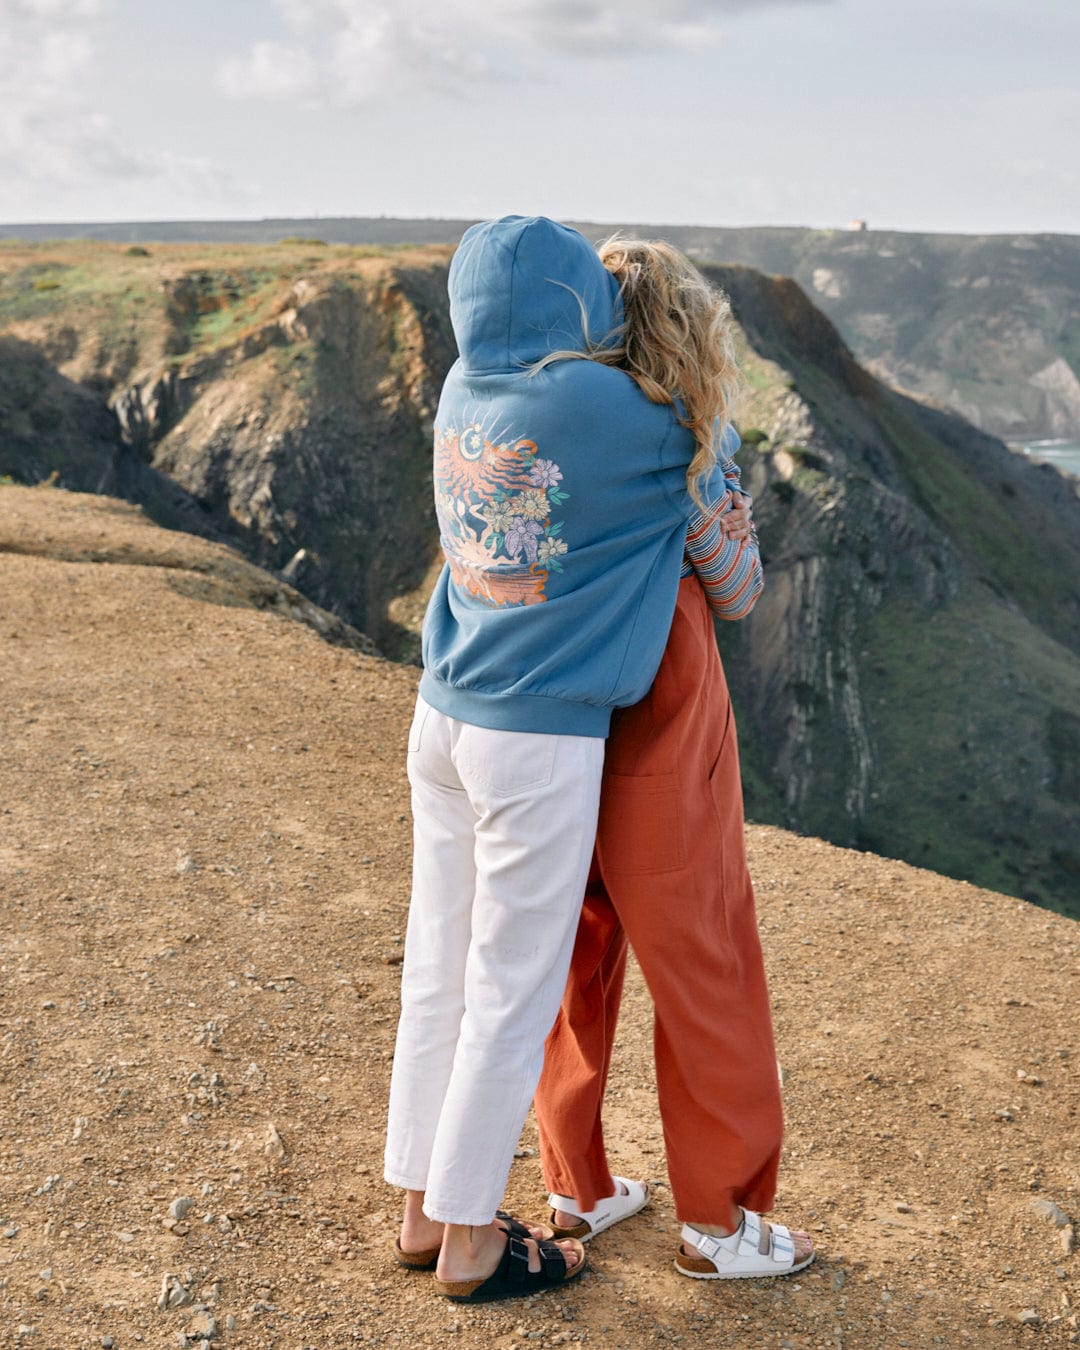 Two people embrace while standing on a cliff overlooking a scenic coastal view; one wears a Saltrock Better Days - Womens Pop Hoodie in Blue with a floral design on the back, and the other a pair of red trousers and a white top.